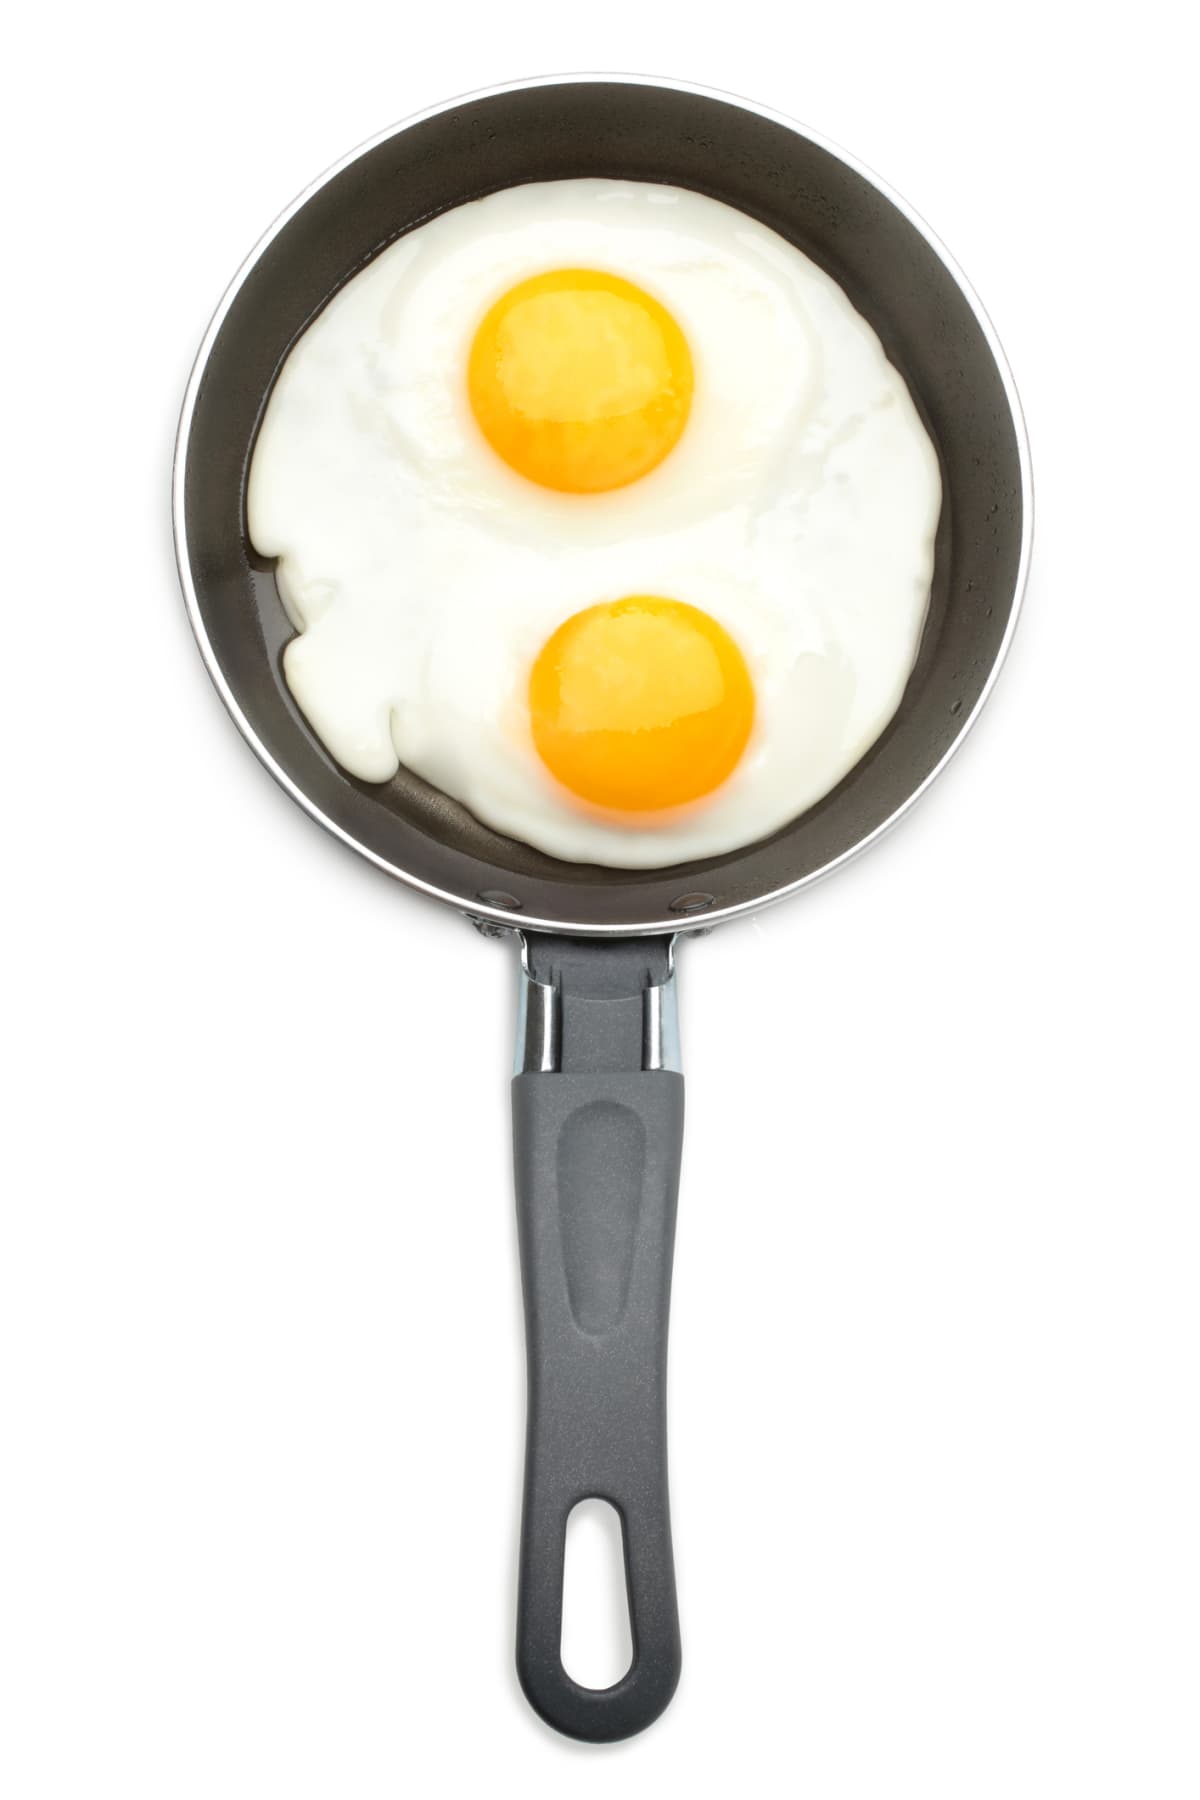 Sunny side up eggs frying in a pan